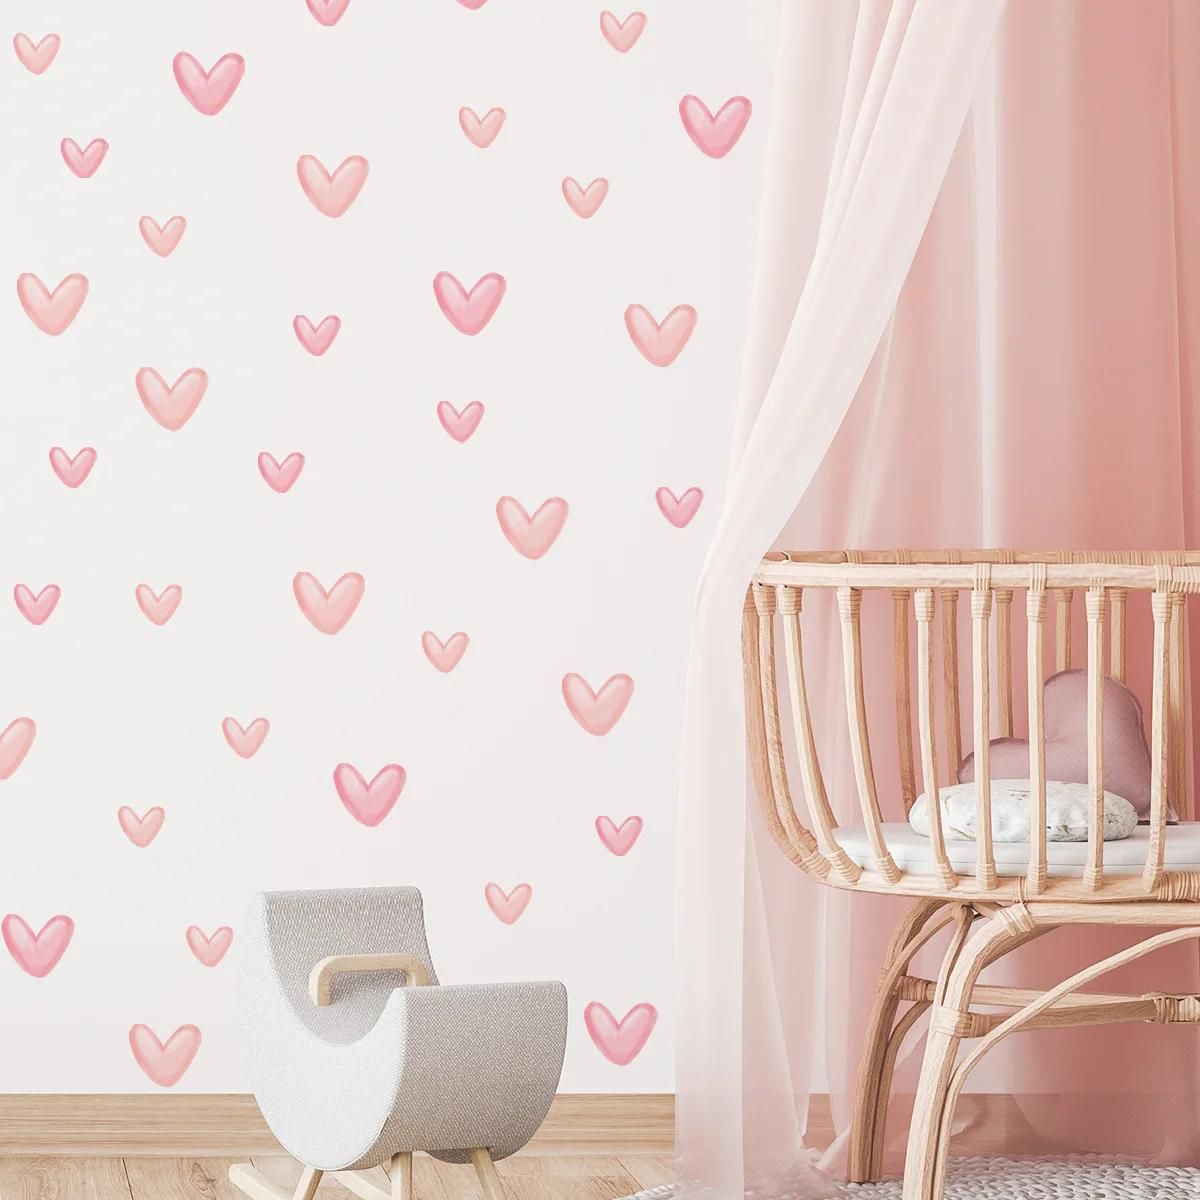 60pcs=6 Sheets Pink Heart Wall Stickers Big Small Hearts Art Wall Decals for Children Baby Girls Room Nursery Wallpapers Decor